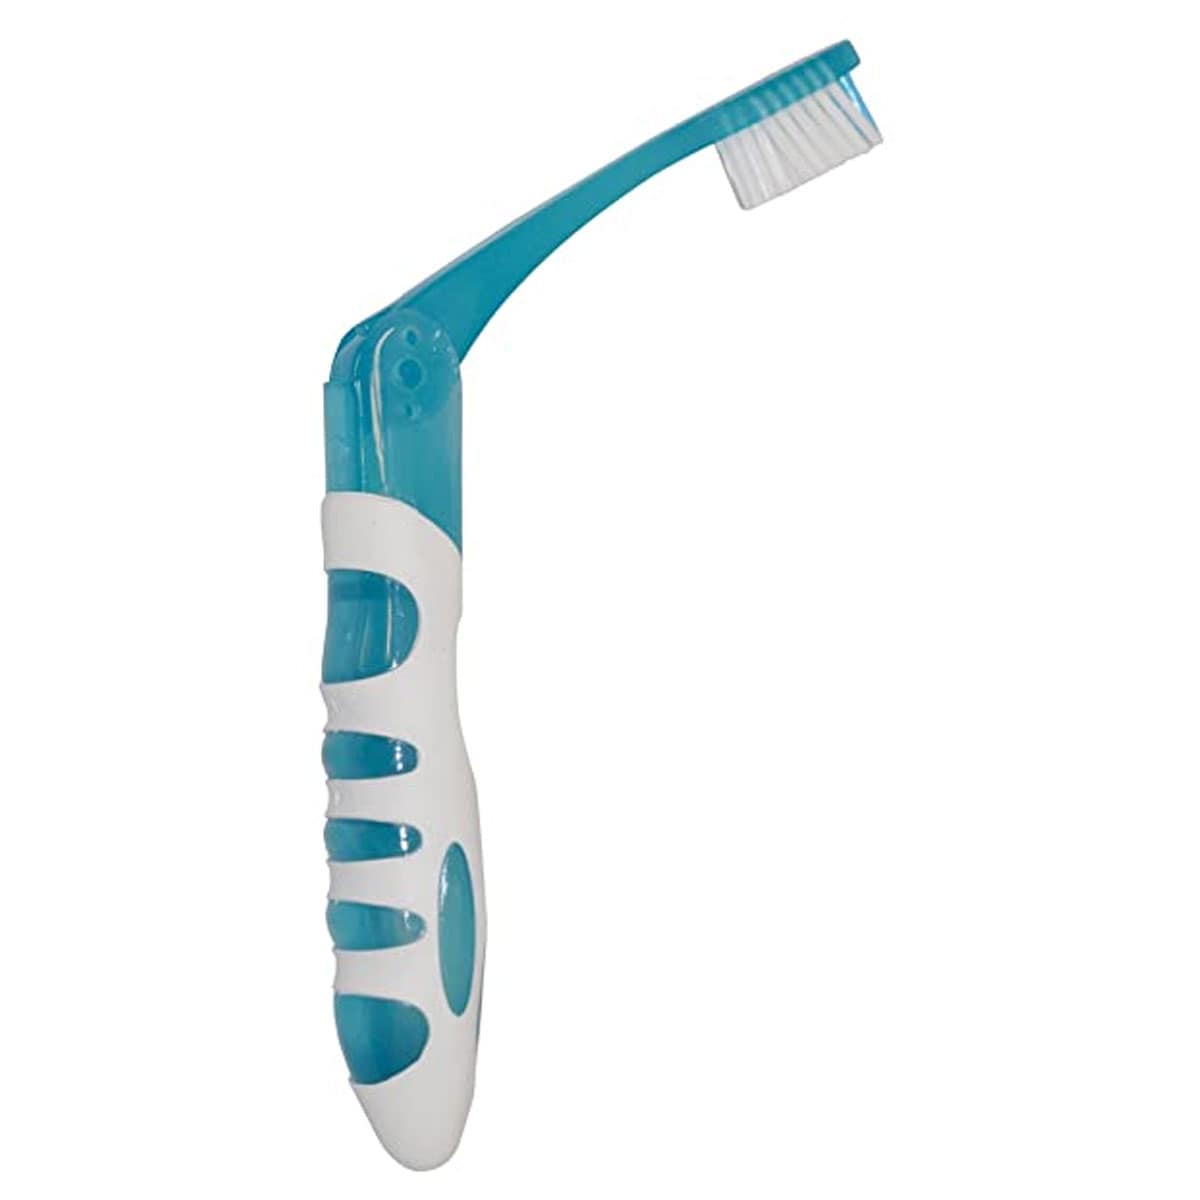 SprayCo Travel Guard Folding Toothbrush (Colours selected at random)